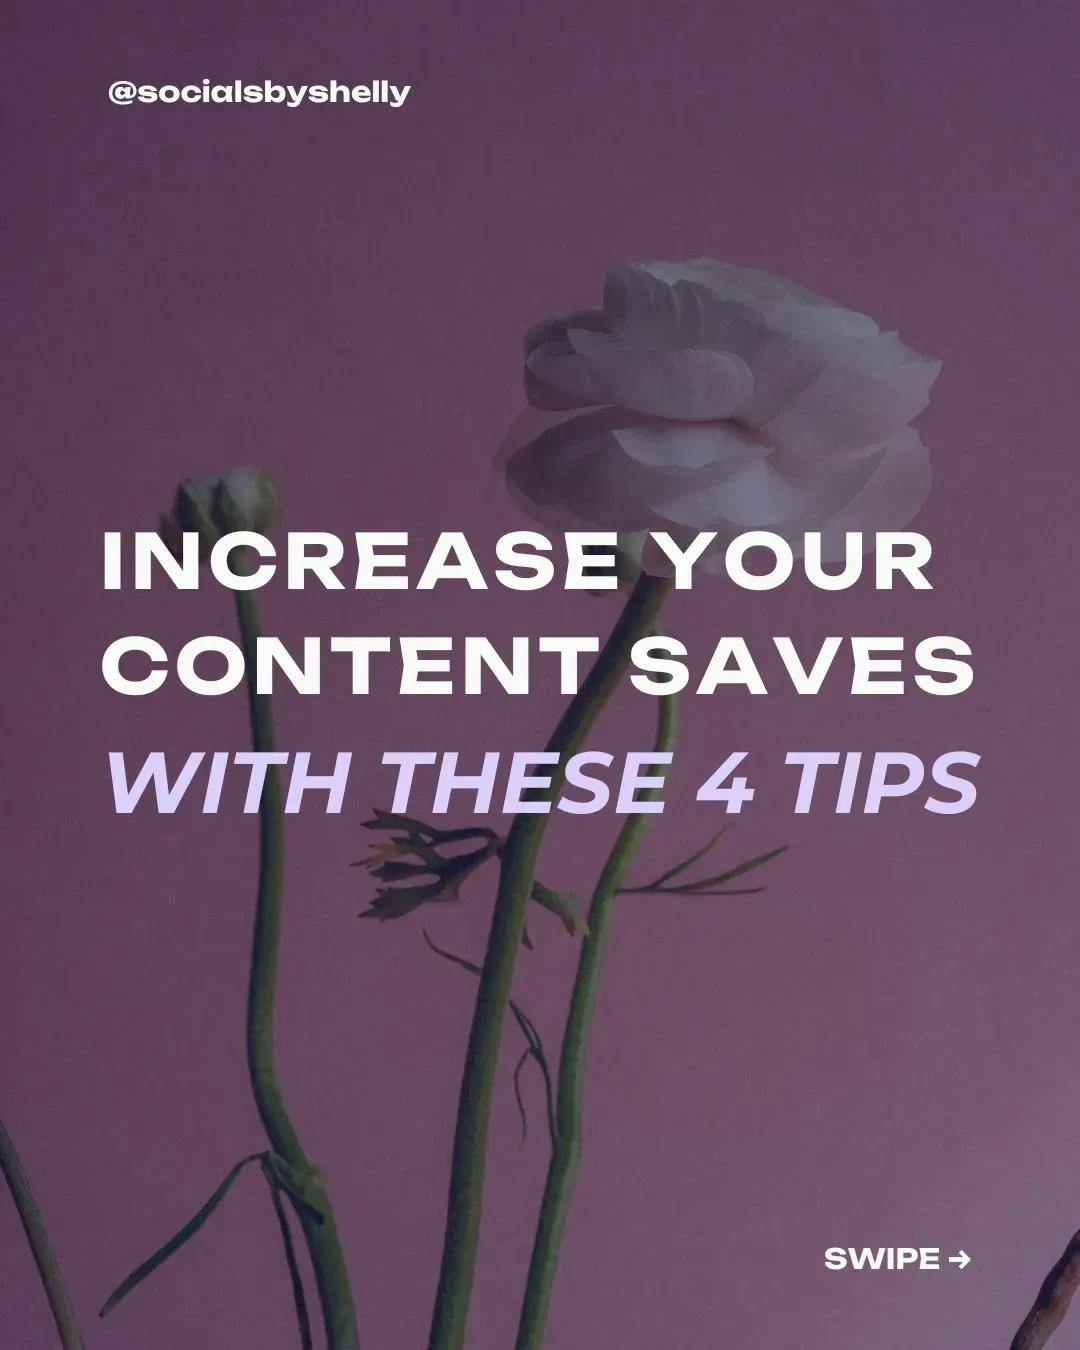 Instagram post title: INCREASE YOUR CONTENT SAVES WITH THESE 4 TIPS